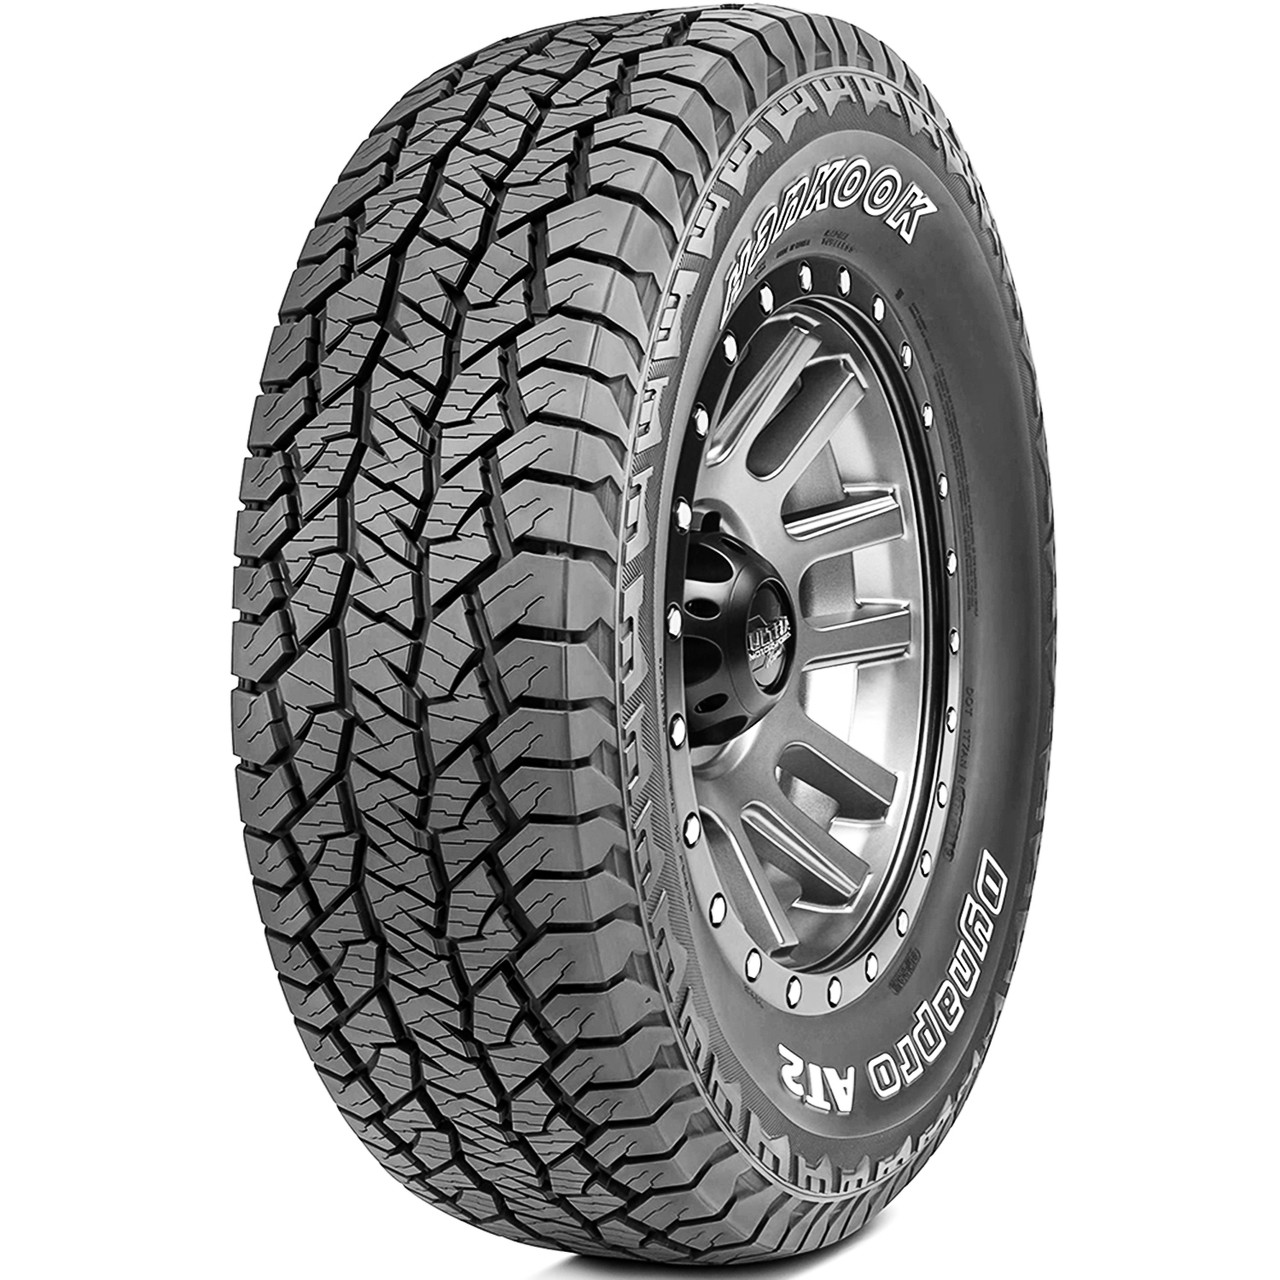 Photos - Motorcycle Tyre Hankook Dynapro AT2 315/70R17, All Season, All Terrain tires. 